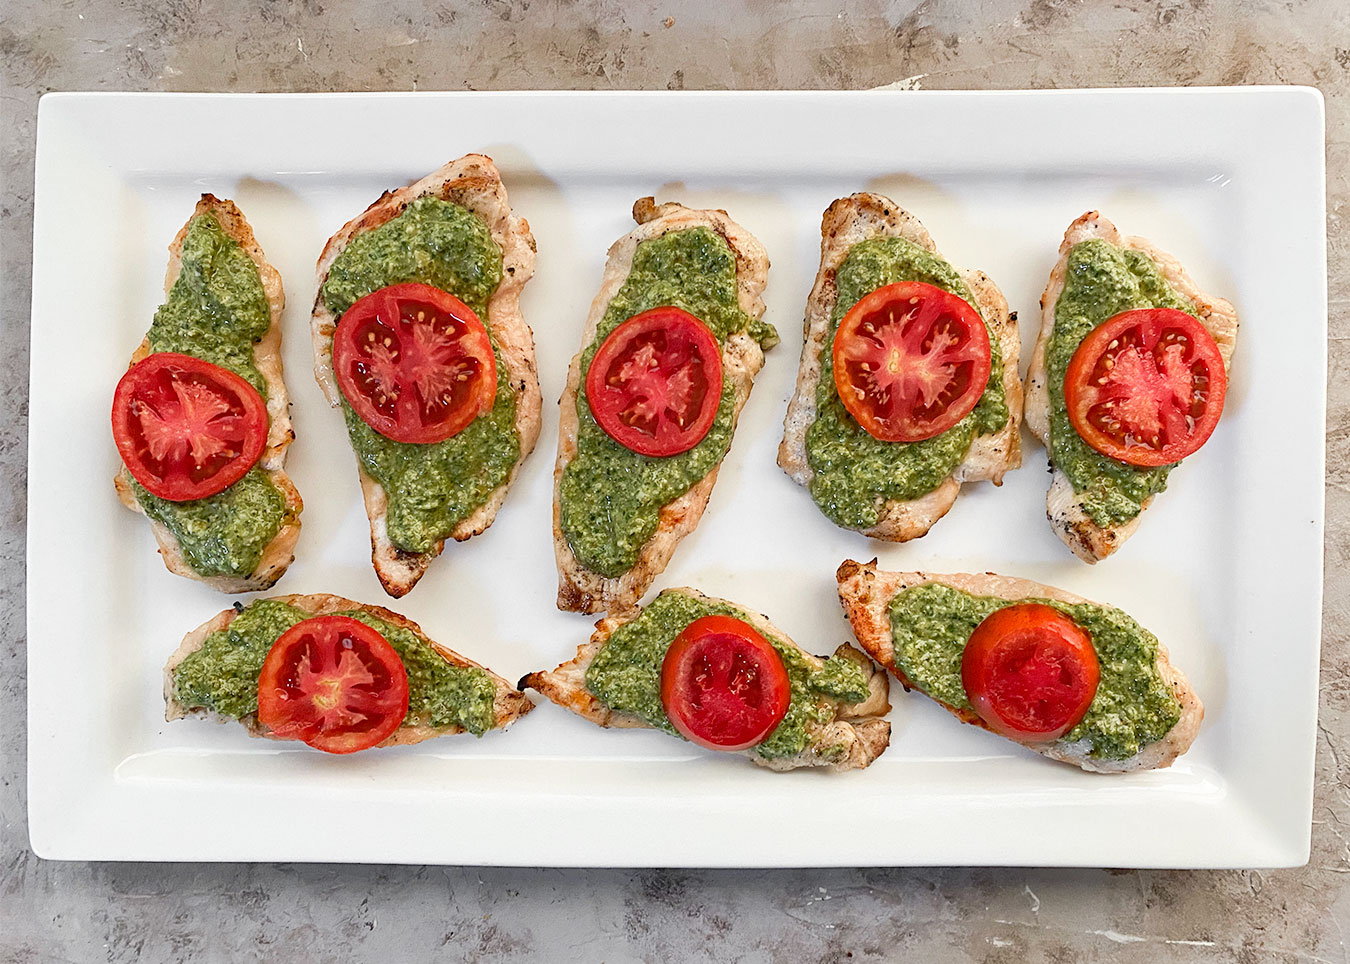 Grilled chicken breasts, pesto and tomatoes